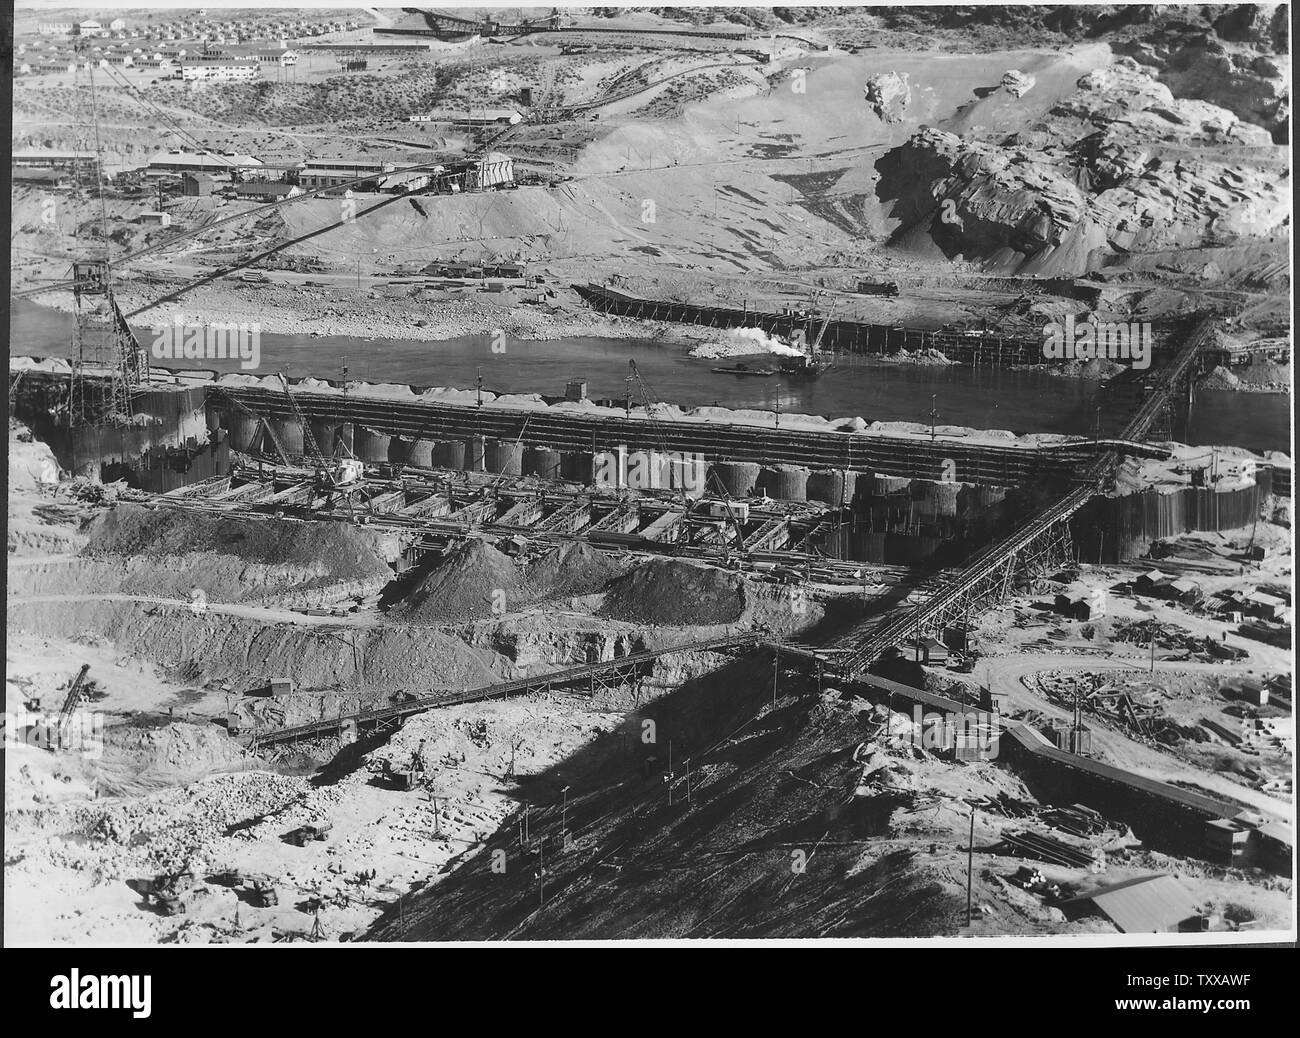 Behind section E of west cofferdam where bedrock overburden is being removed for placing of block 40 of the Grand Coulee dam. Across the river are the contractor's machine shops, above which is the general office building , mess hall, the 64 one-room houses, and the hospital - the east cofferdam and conveyor to the west side spoil pile.; Scope and content:  Photograph from Volume Two of a series of photo albums documenting the construction of the Grand Coulee Dam and related work on the Columbia Basin Project. Stock Photo